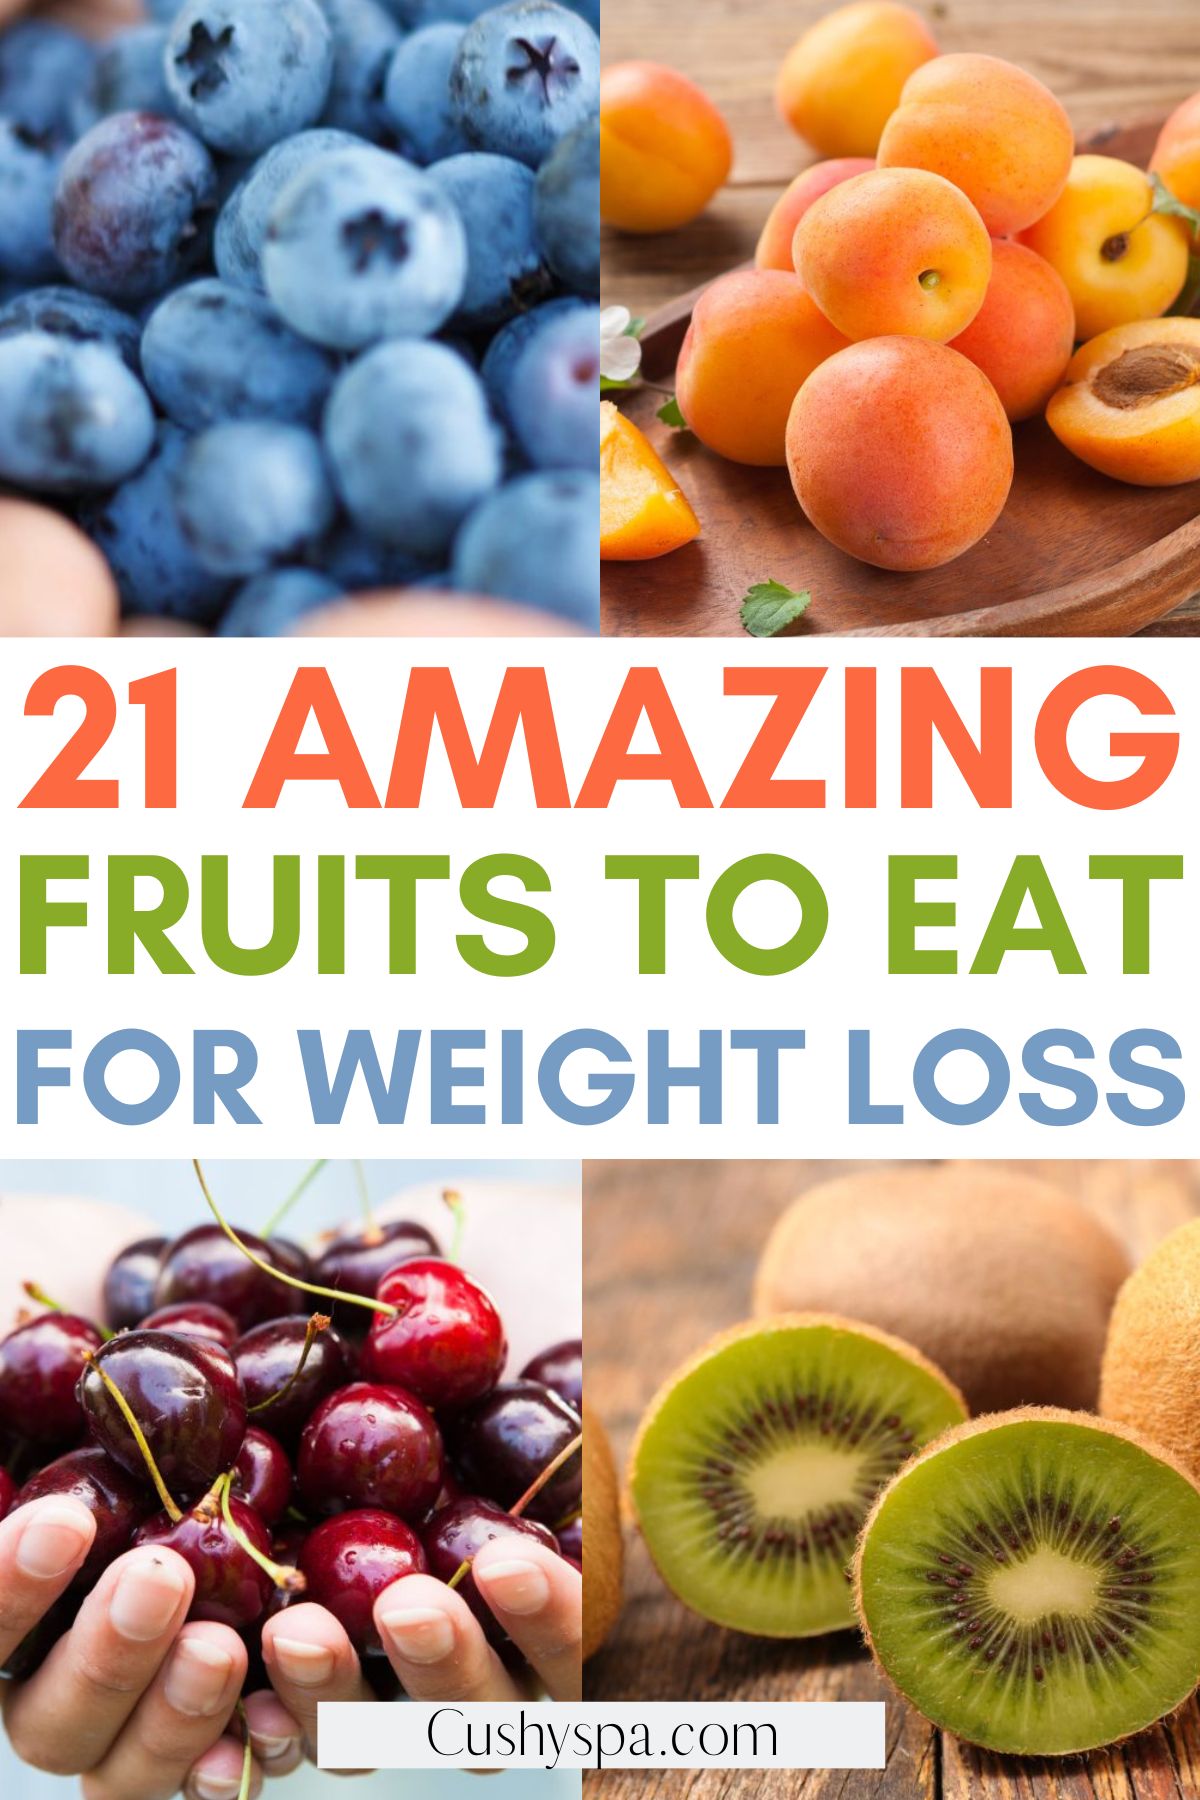 Fruits for Weight Loss